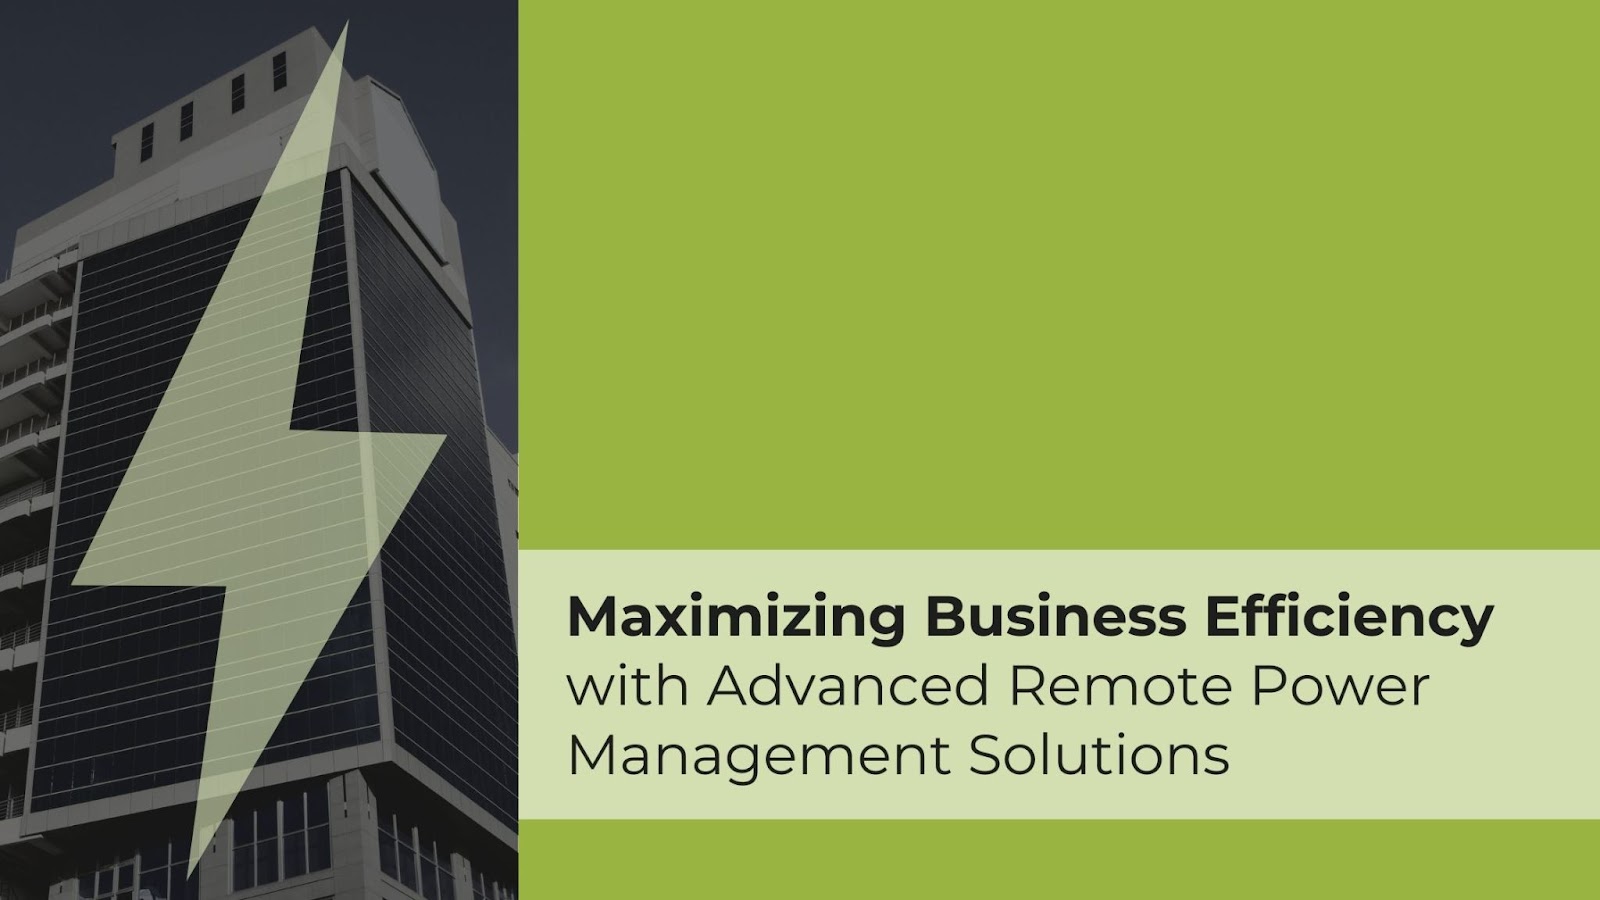 MAXIMIZING BUSINESS EFFICIENCY WITH ADVANCED REMOTE POWER MANAGEMENT SOLUTIONS